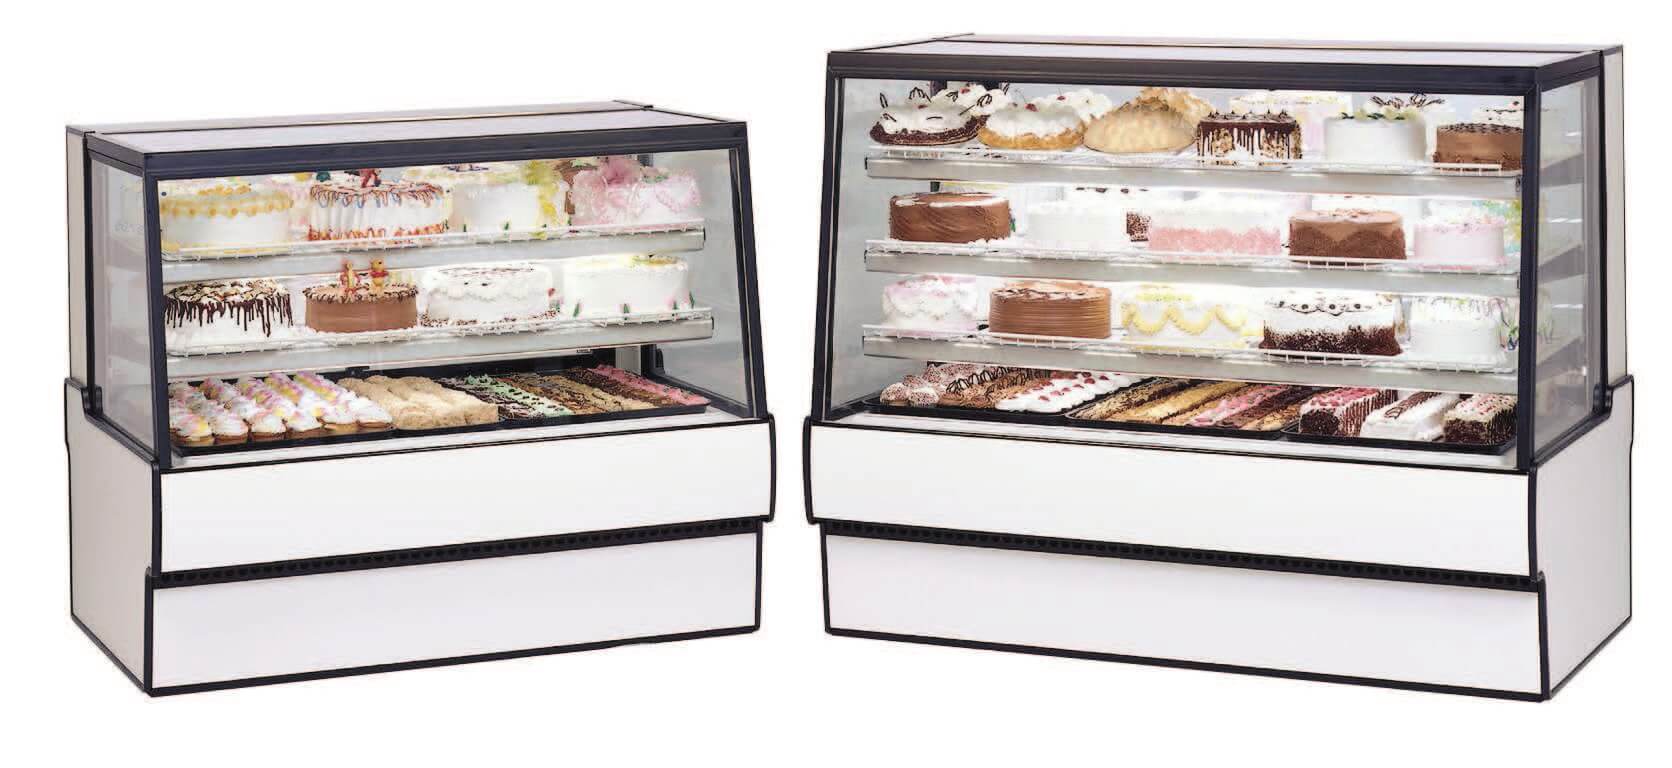 sgr3142-high-volume-refrigerated-bakery-case[1]